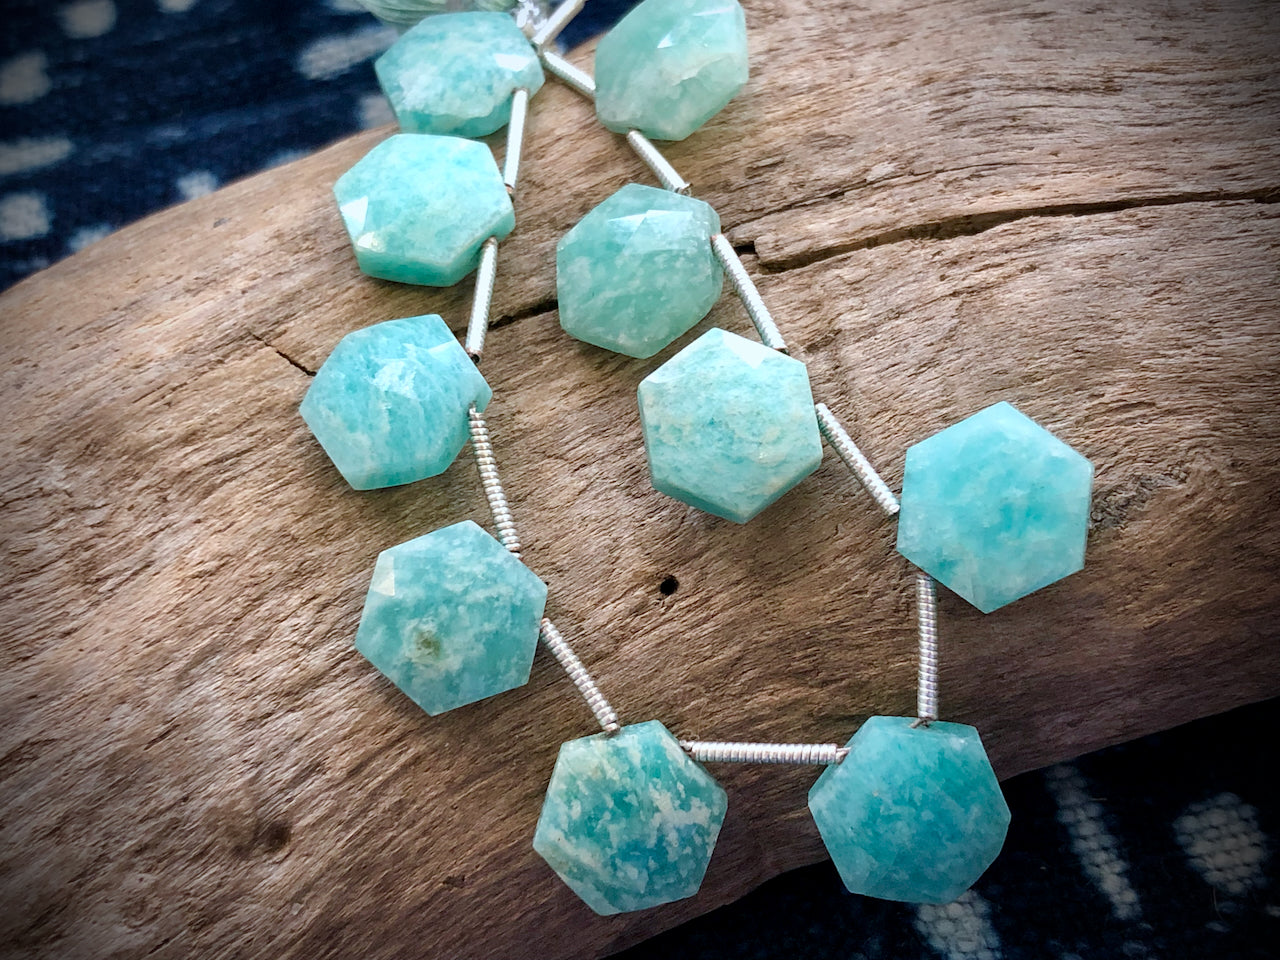 Russian Apatite Faceted Hexagon Bead Strand - 11mm - 5.5"